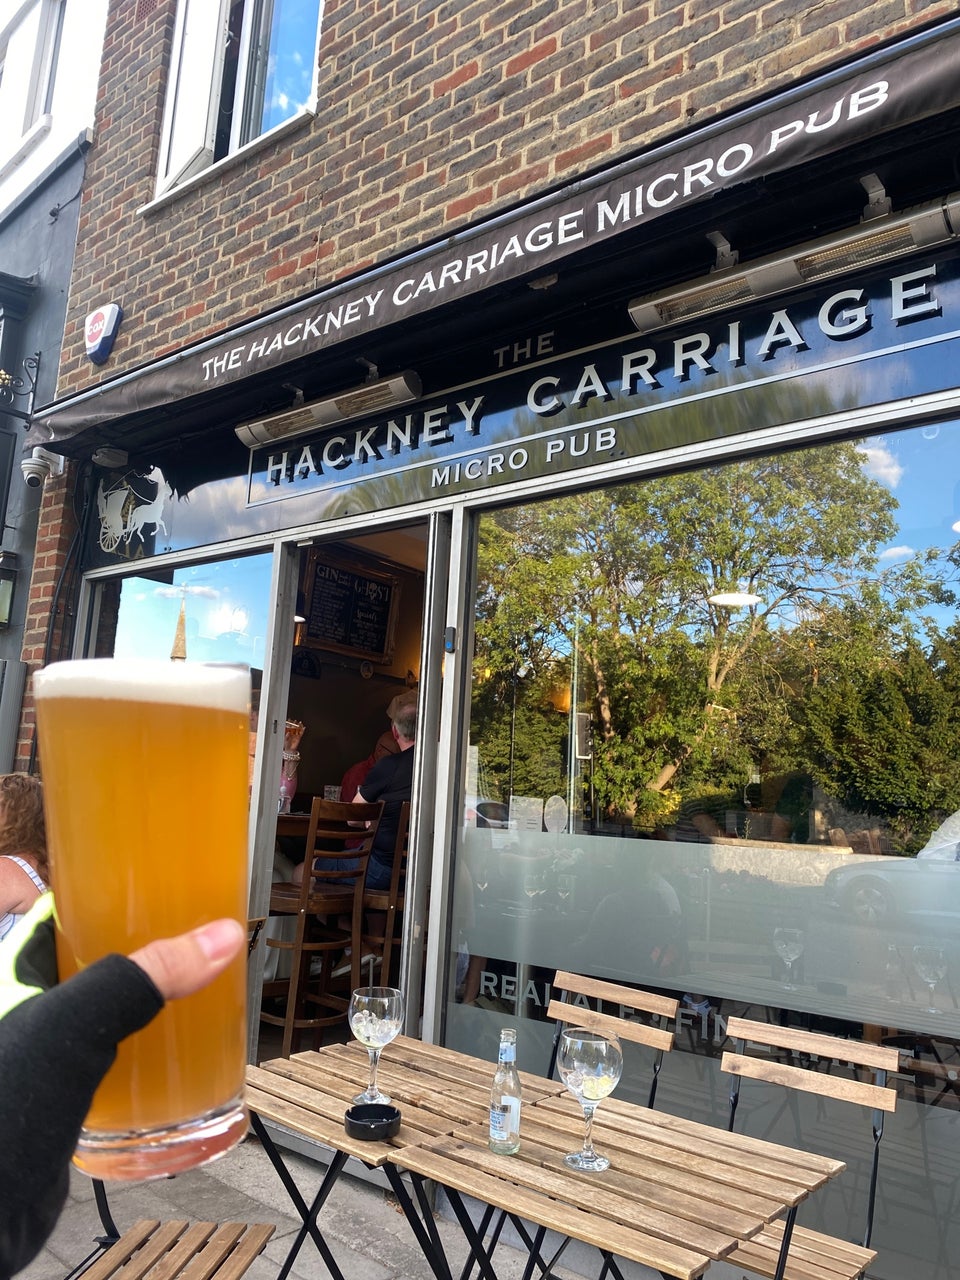 The Hackney Carriage Micropub